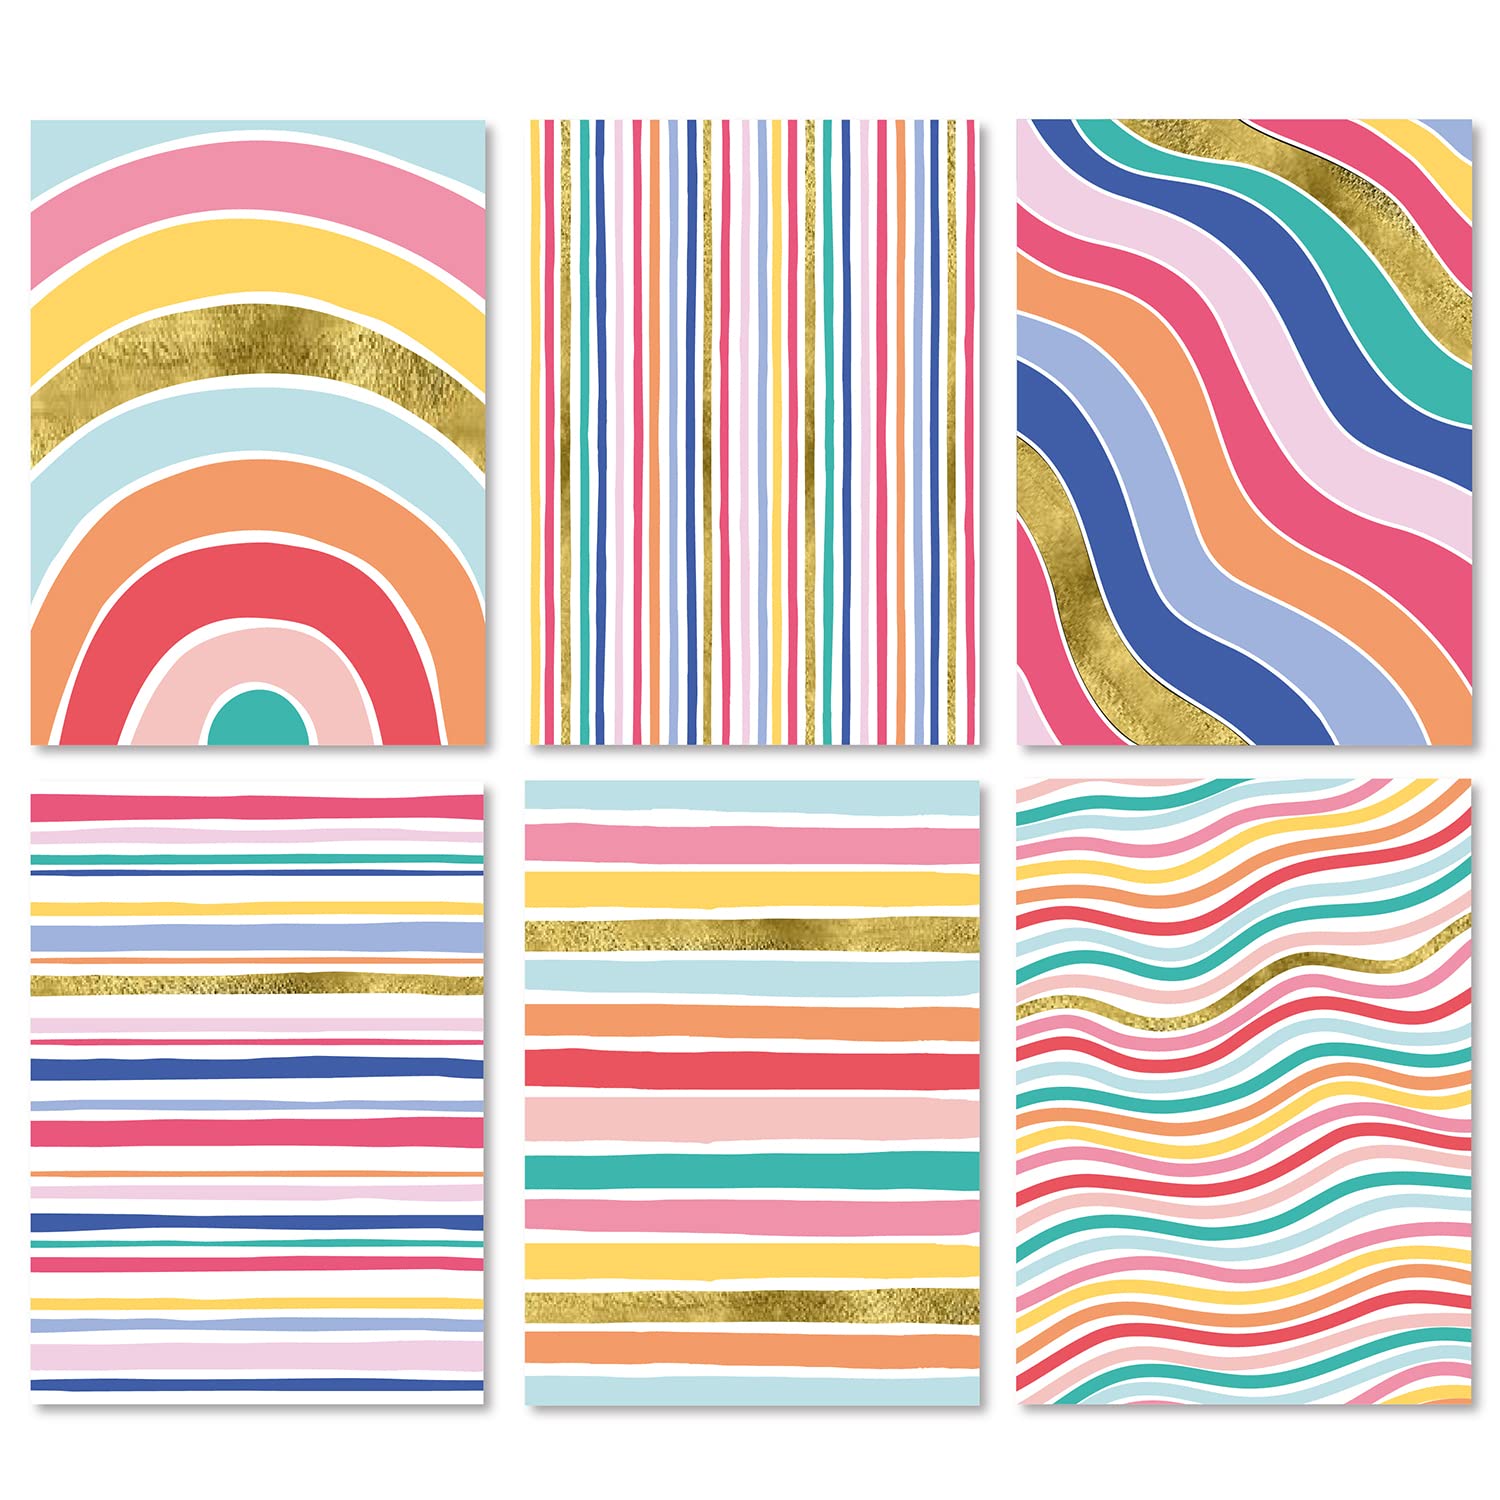 Blank Cards with Envelopes - 48 Striped Gold Foil Blank Note Cards with Envelopes – 6 Assorted Cards for All Occasions! Blank Notecards Stationary Set for Personalized Greeting Cards-4x5.5